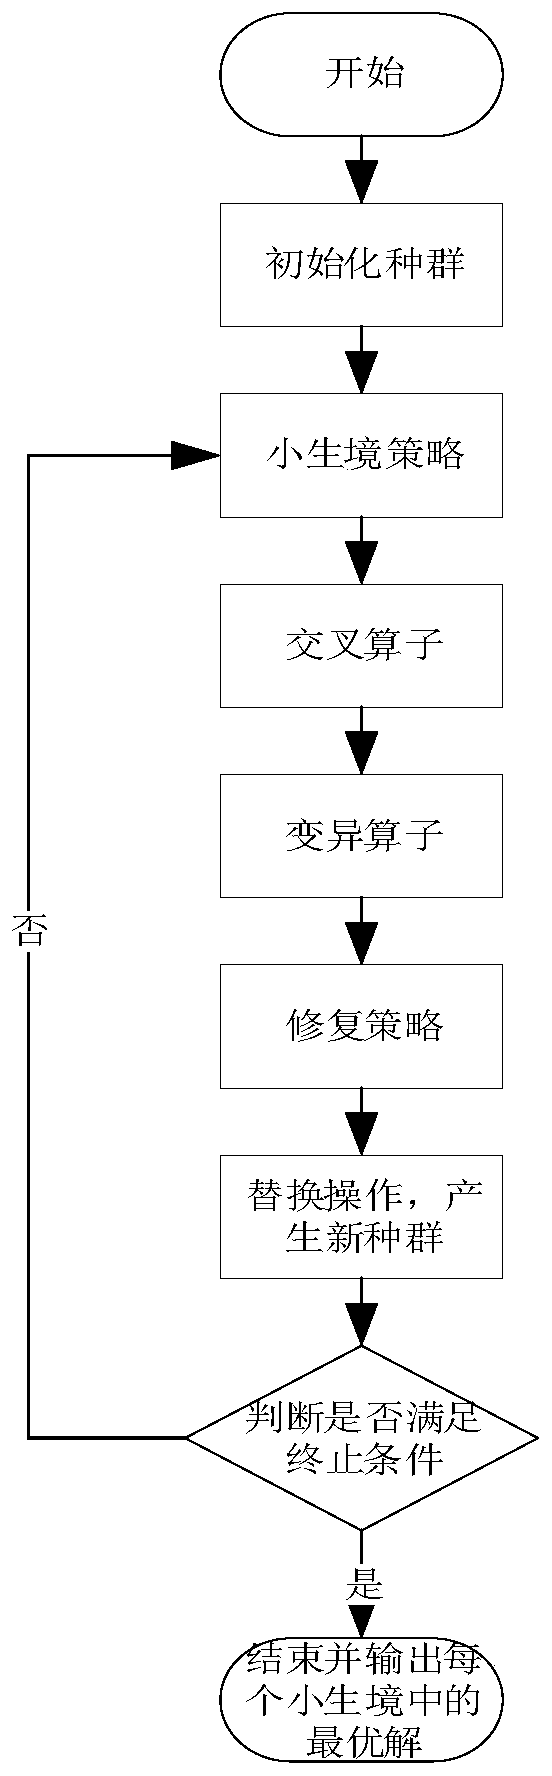 Journey planning method and system